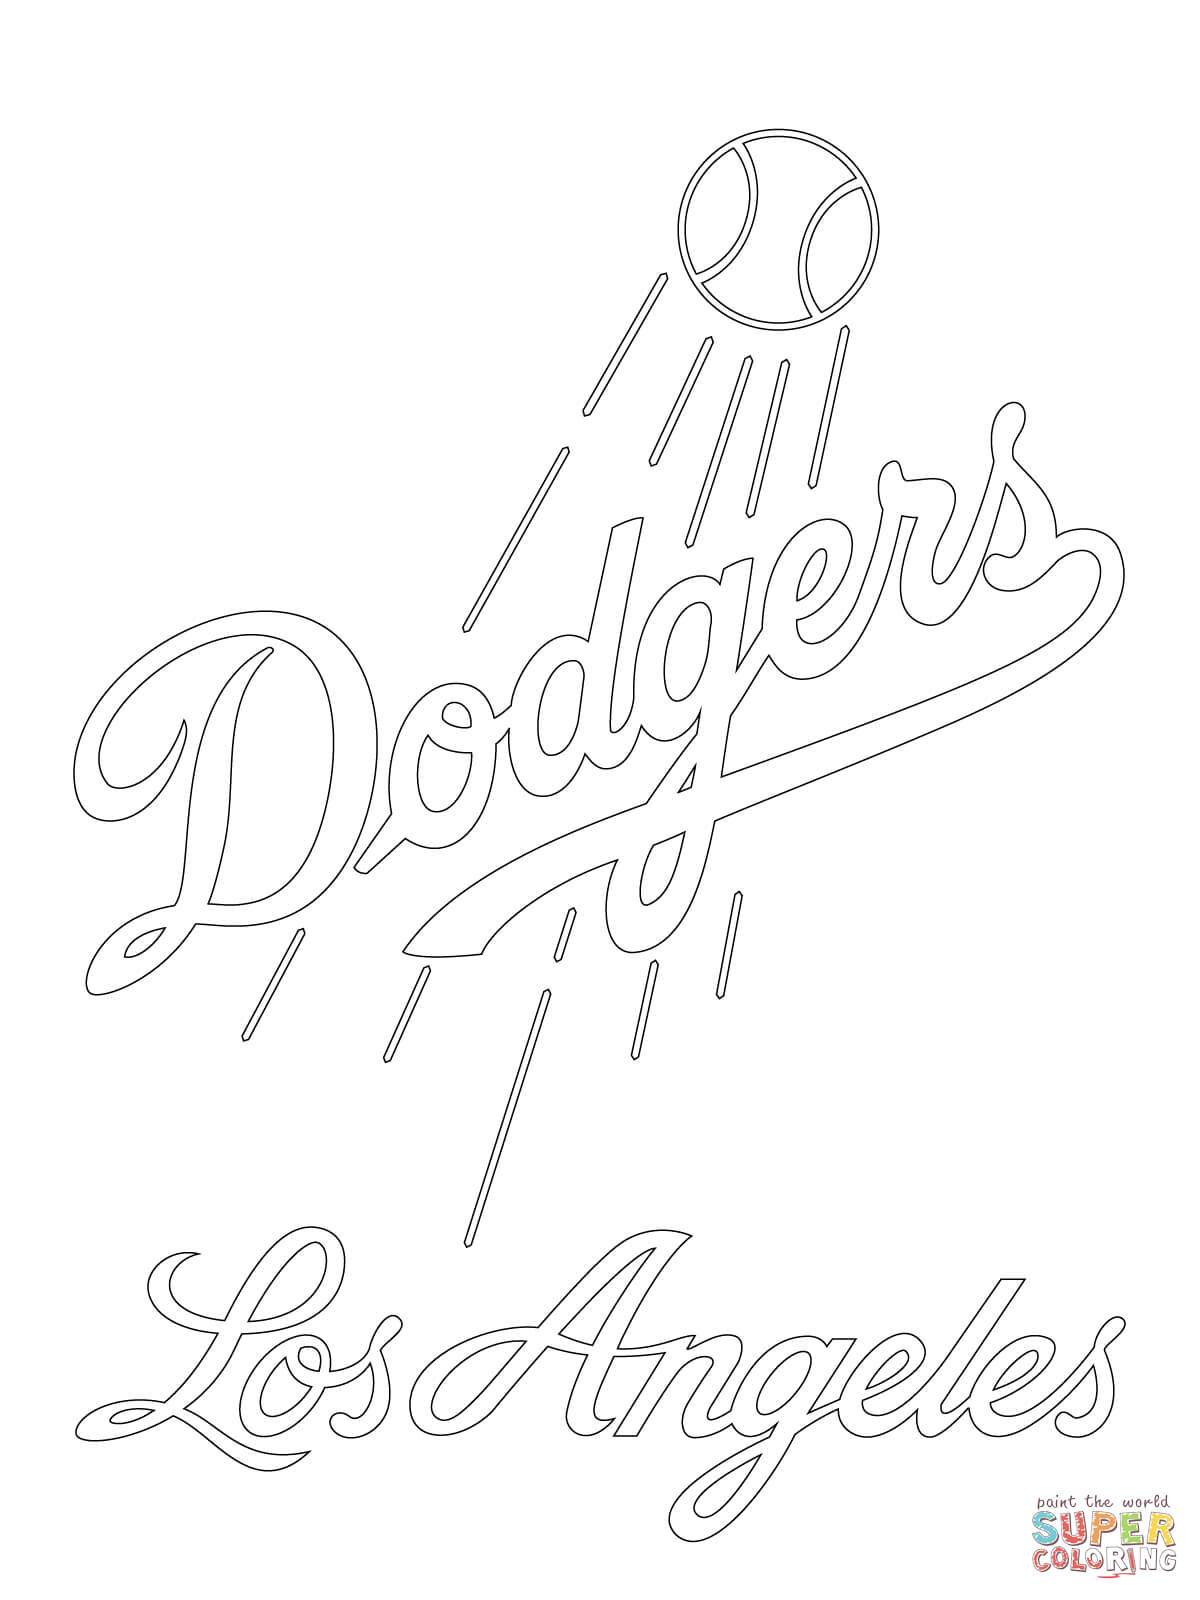 10 Pics of Los Angeles Coloring Pages - Dodgers Logo Coloring ...